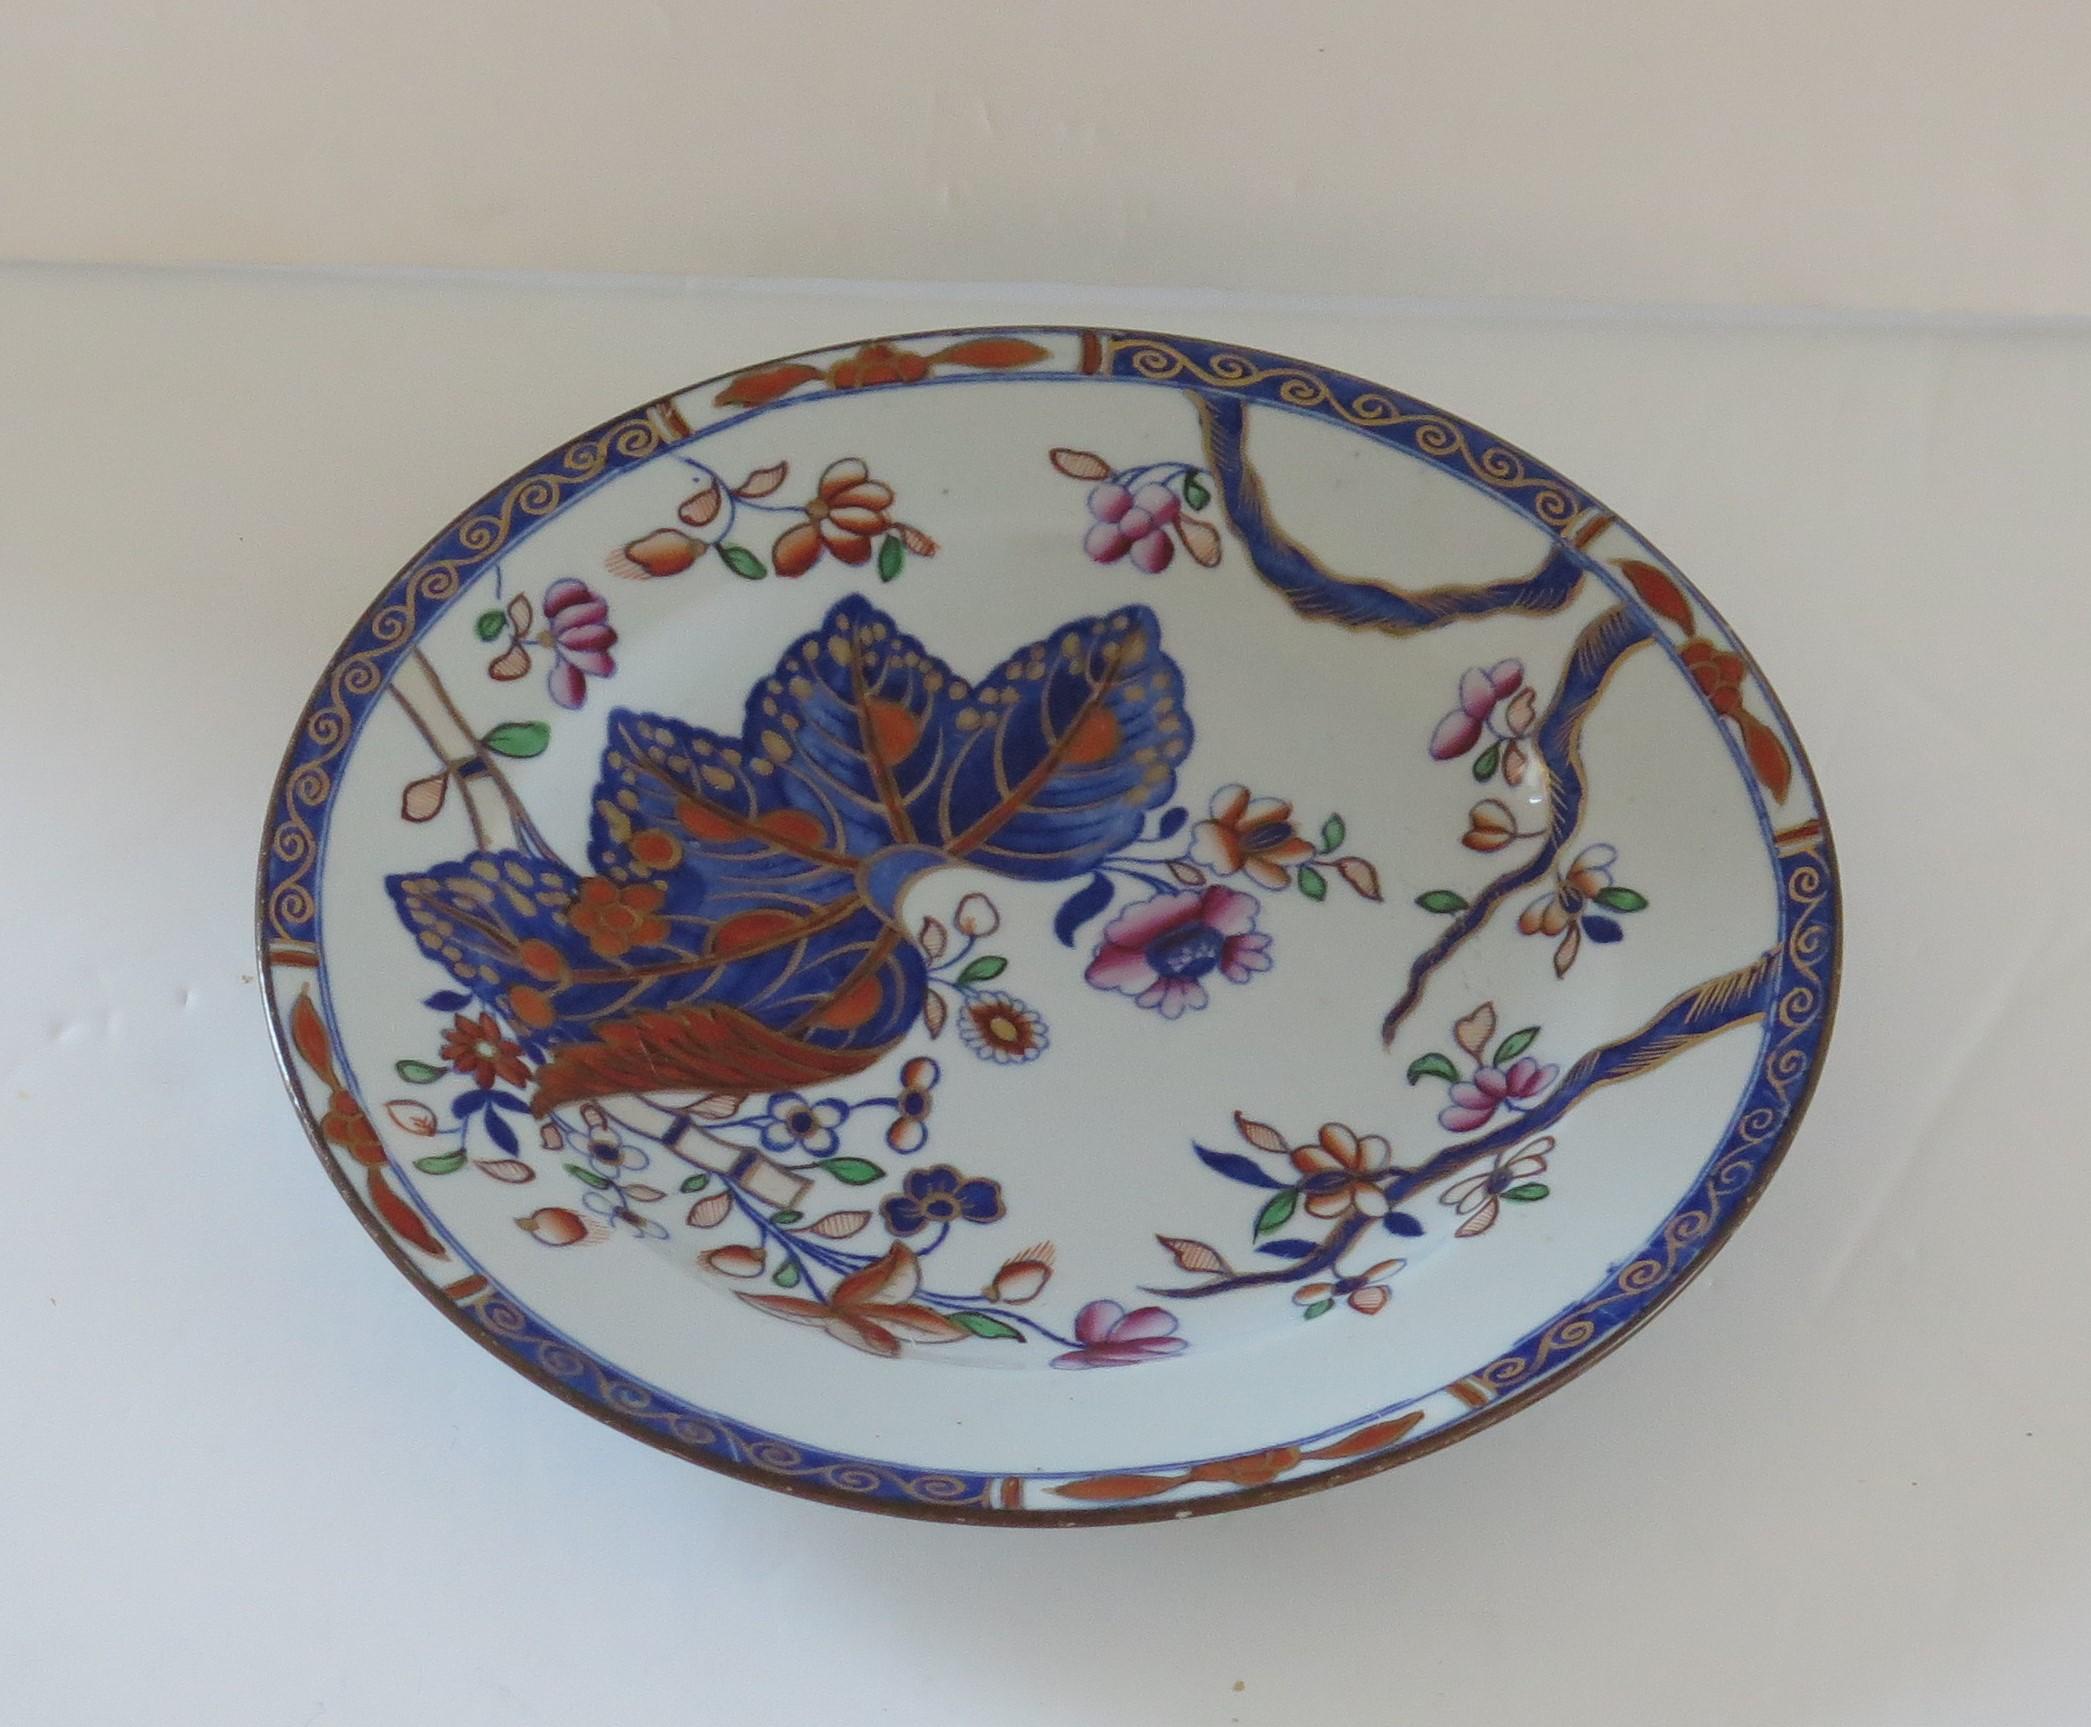 This is a very good stone China (Ironstone) side plate, hand painted in the tobacco leaf pattern, number 2061, made by the Spode factory in the early 19th century, English Georgian period, circa 1820.

The plate is made from Ironstone China and